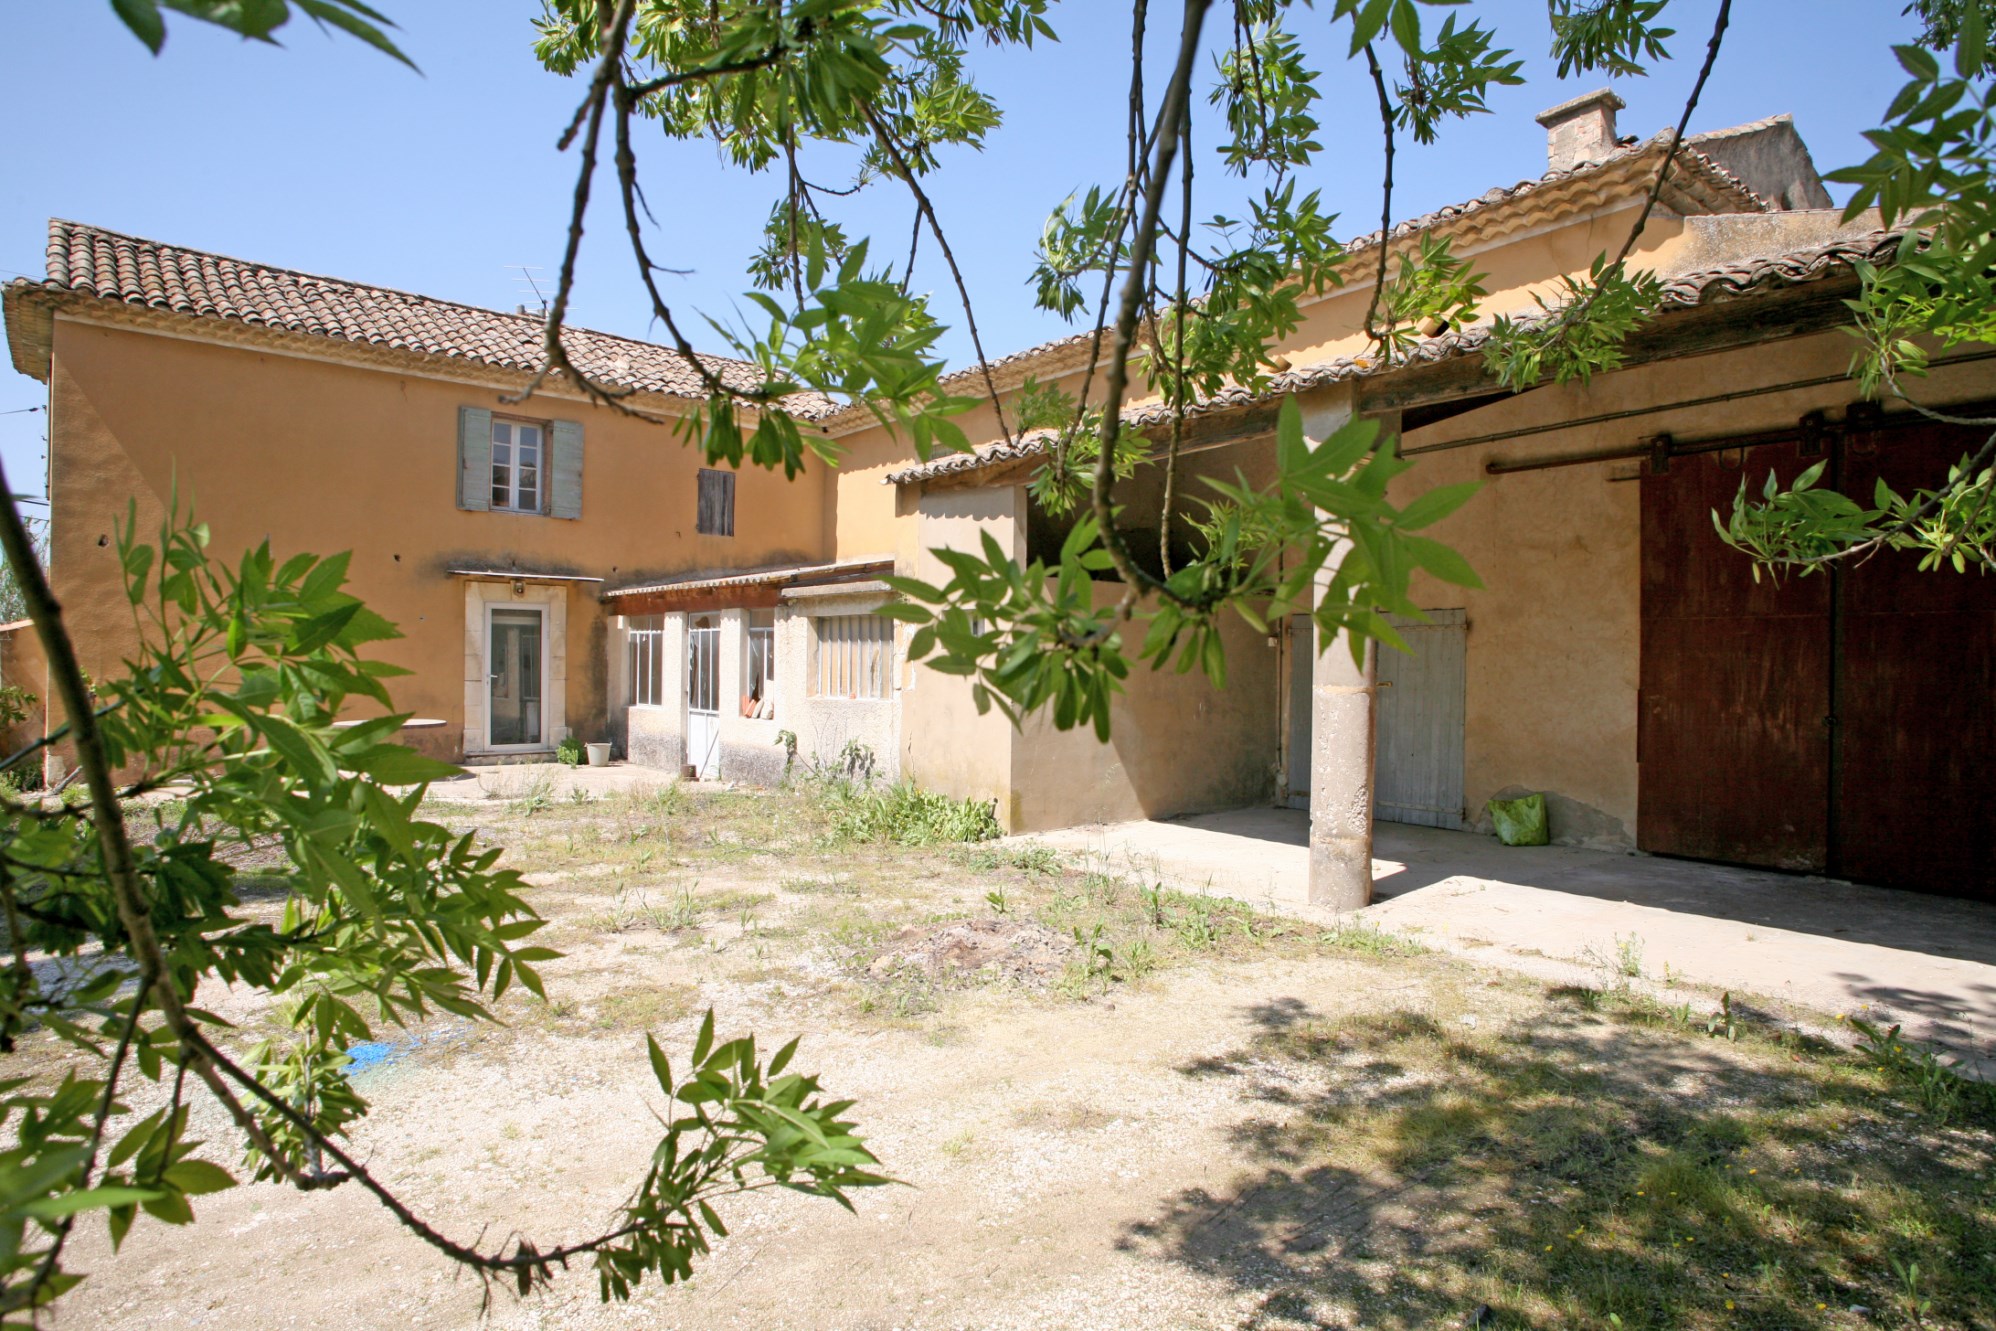 Close to one of the Luberon's famous villages, this beautiful farmhouse, requiring renovation, sits on 3 hectares (7.4 acres) of grounds.